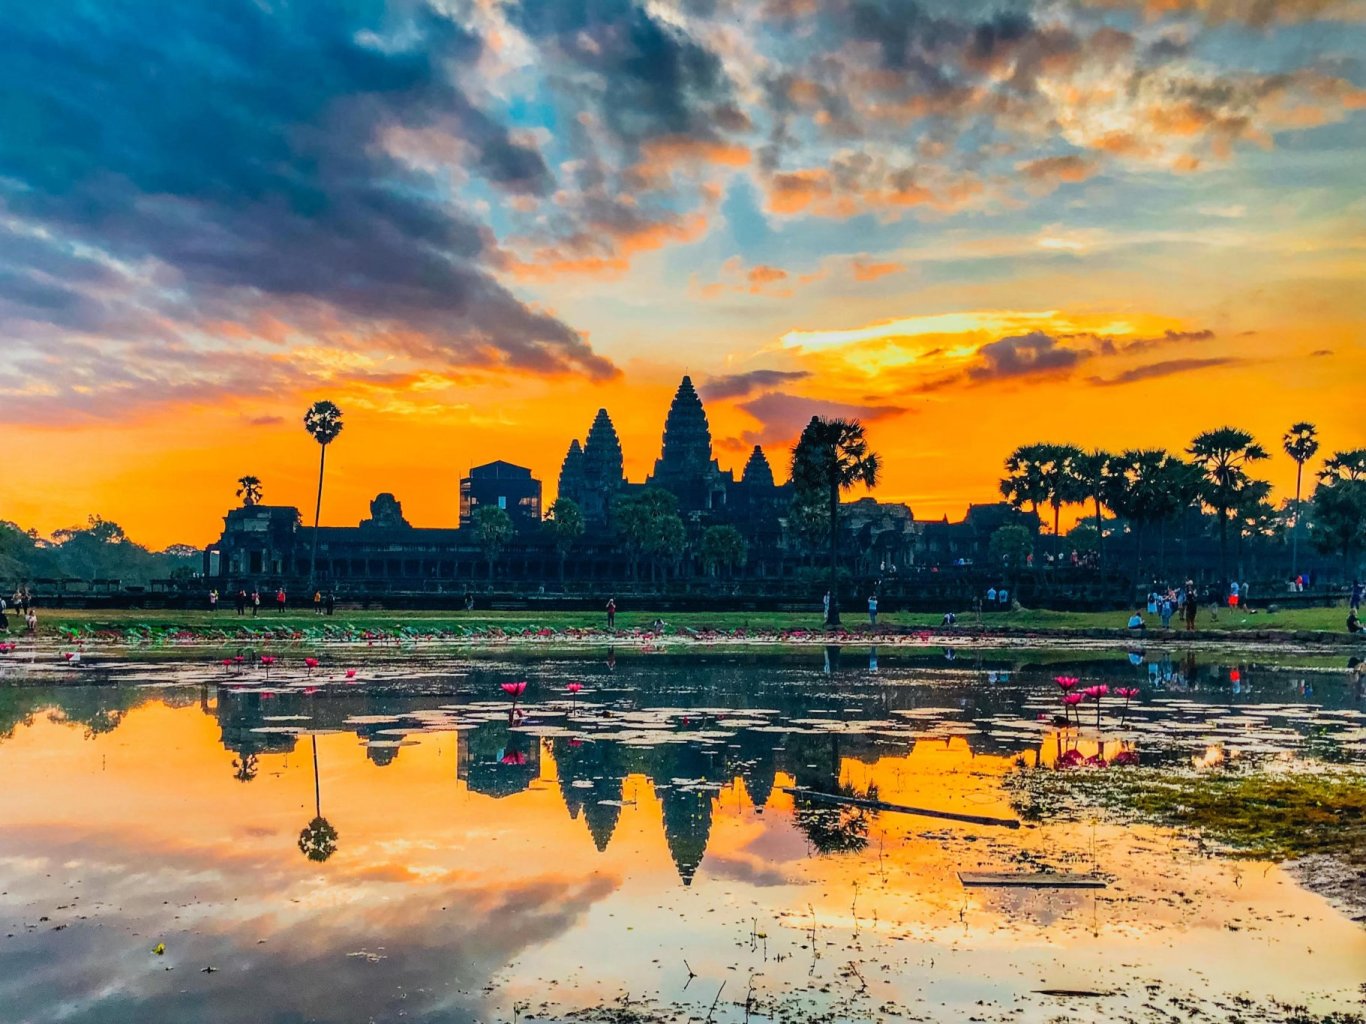 Sunset over Angkor Wat Temple, Cambodia